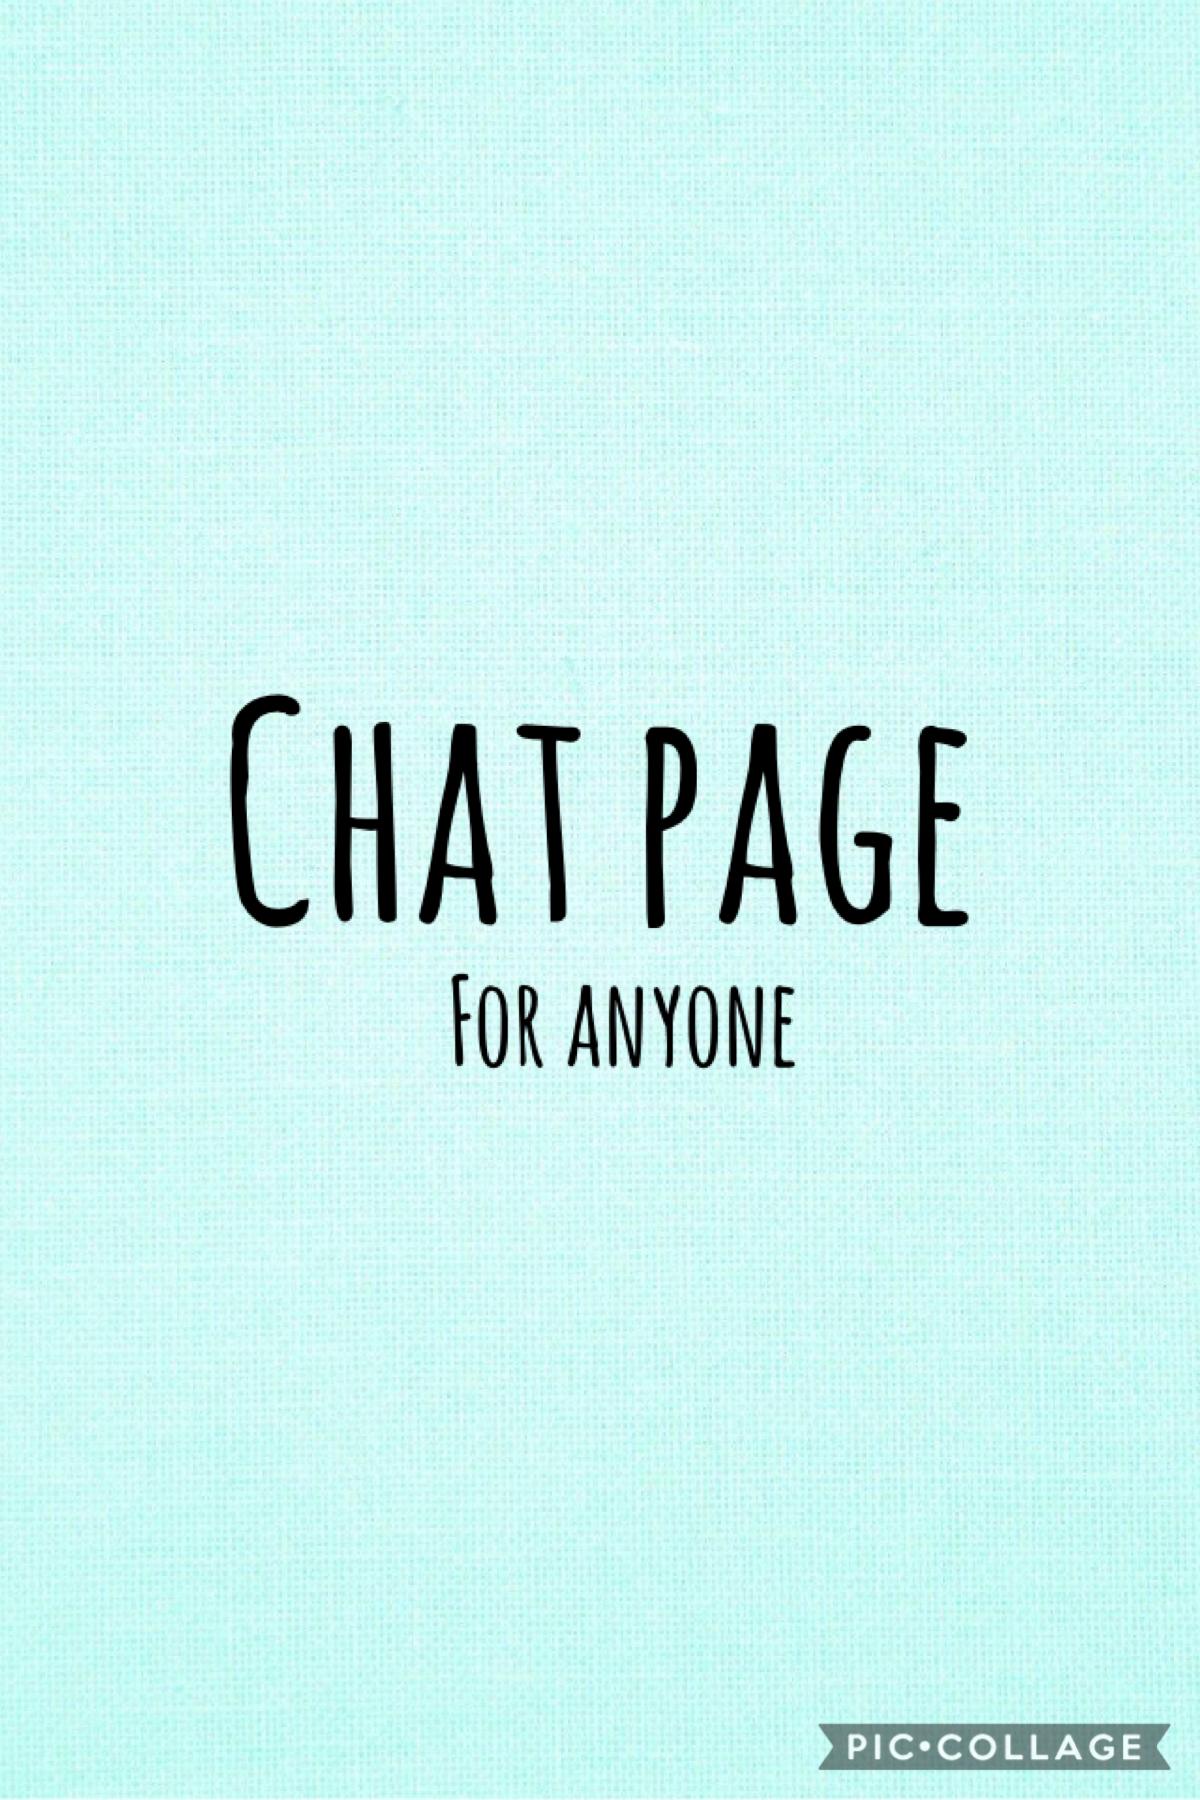 Chat page for everyone 